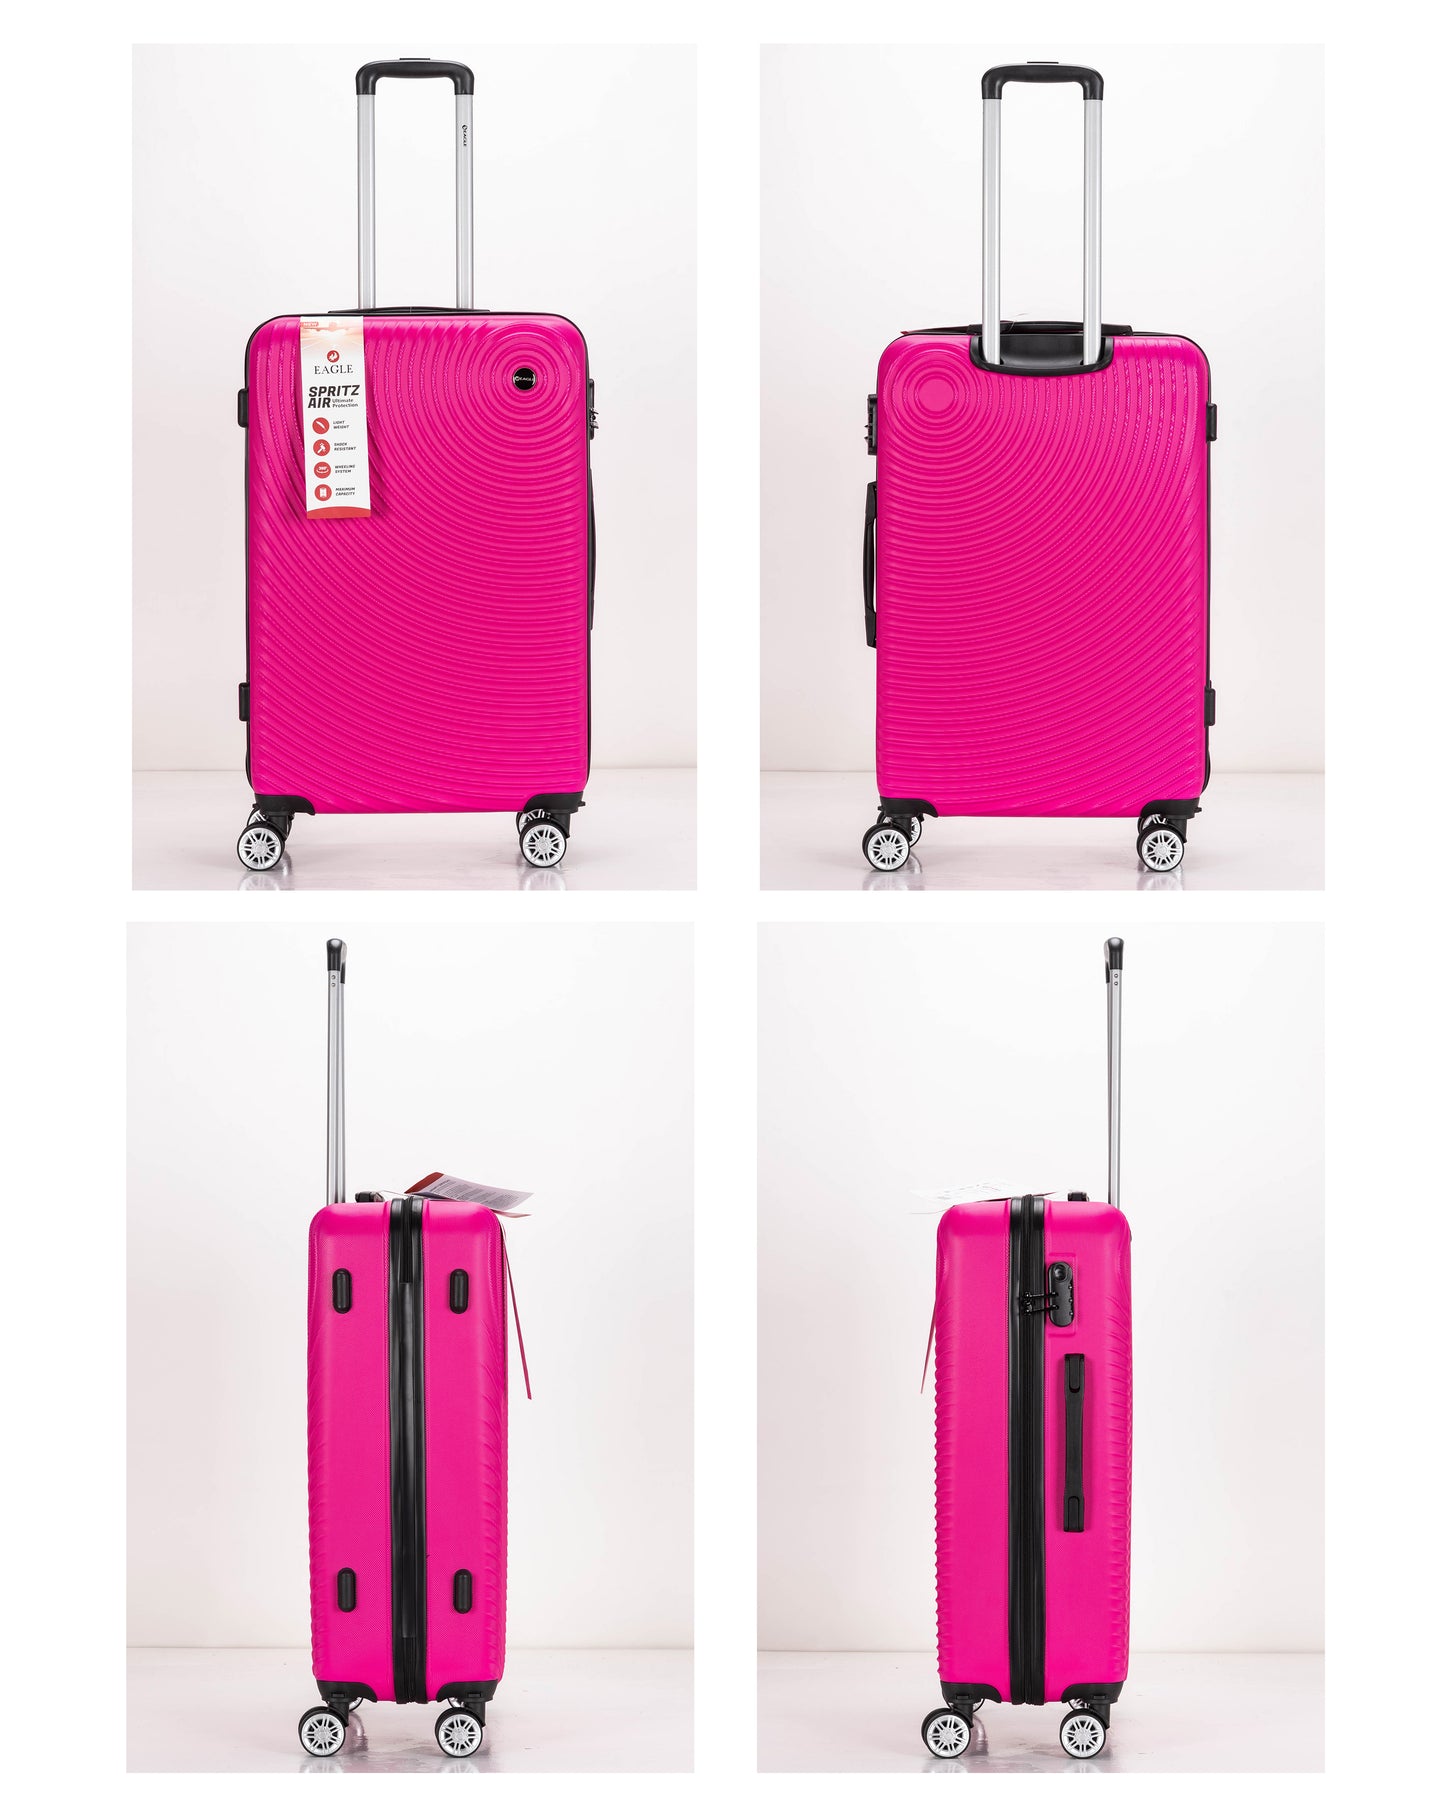 Circle ABS Hard Shell Suitcase Hot Pink